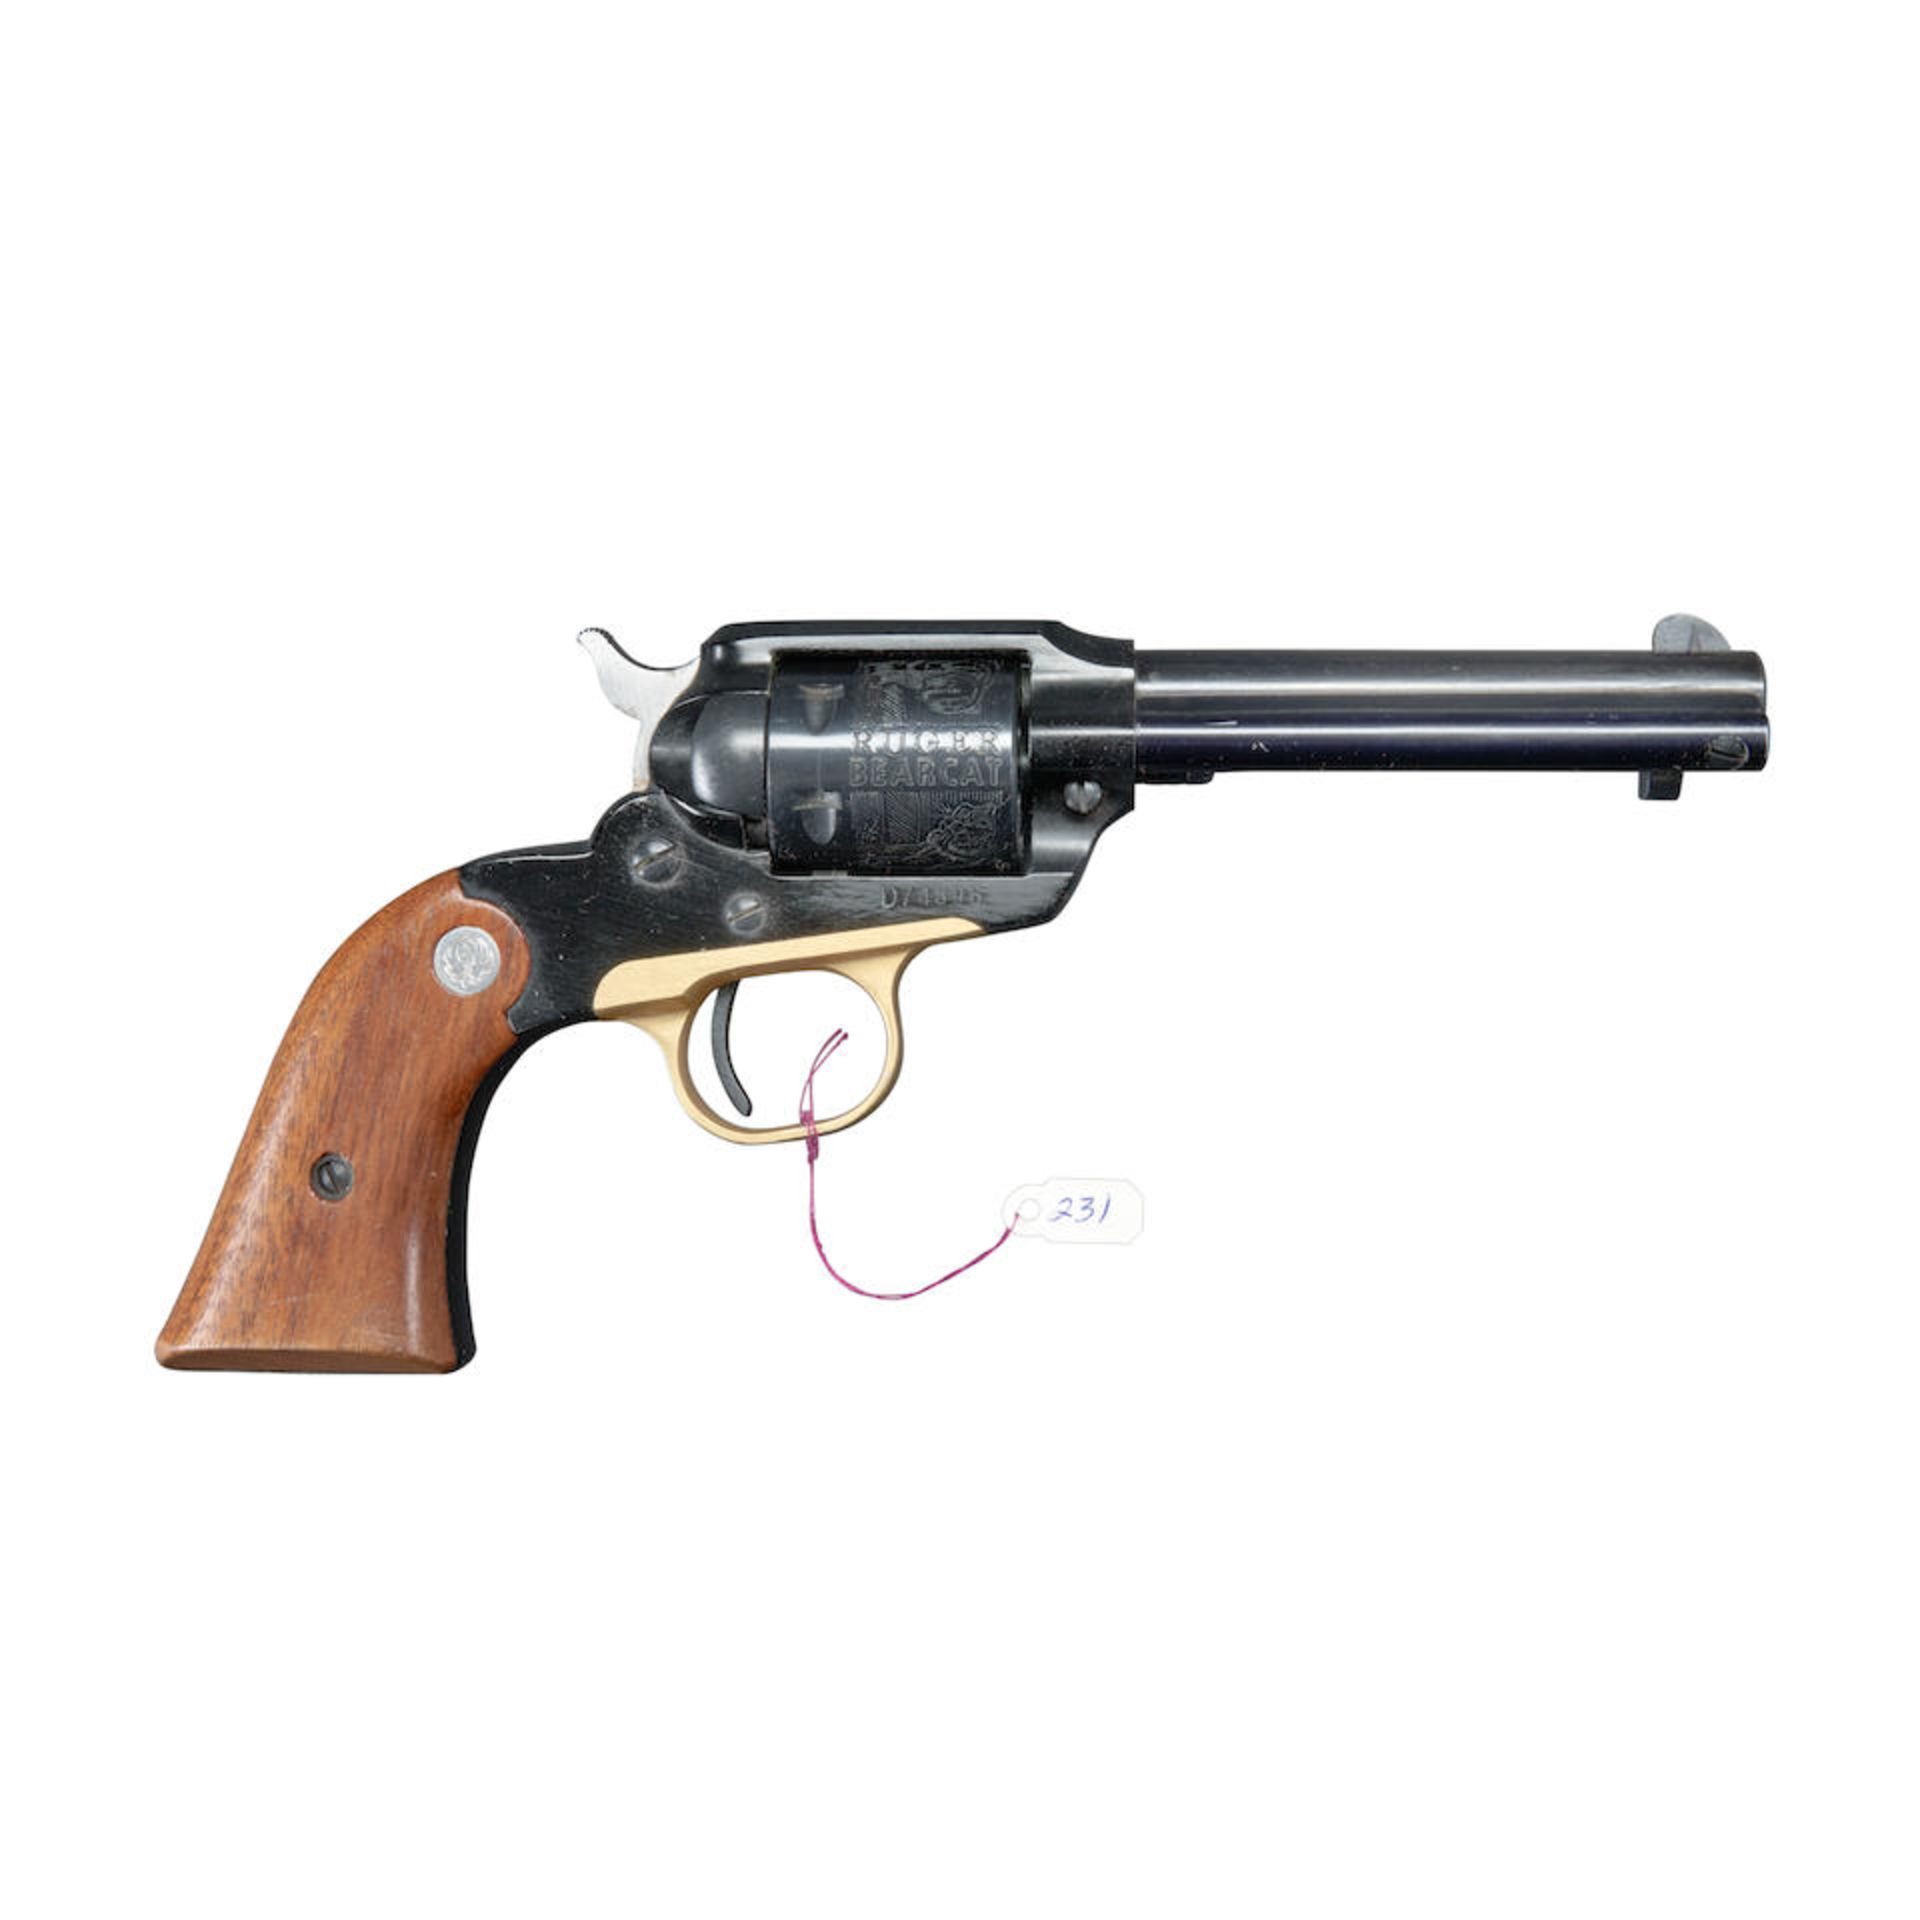 Ruger Bearcat Duplicate Serial Number Single Action Revolver, Curio or Relic firearm - Bild 5 aus 5